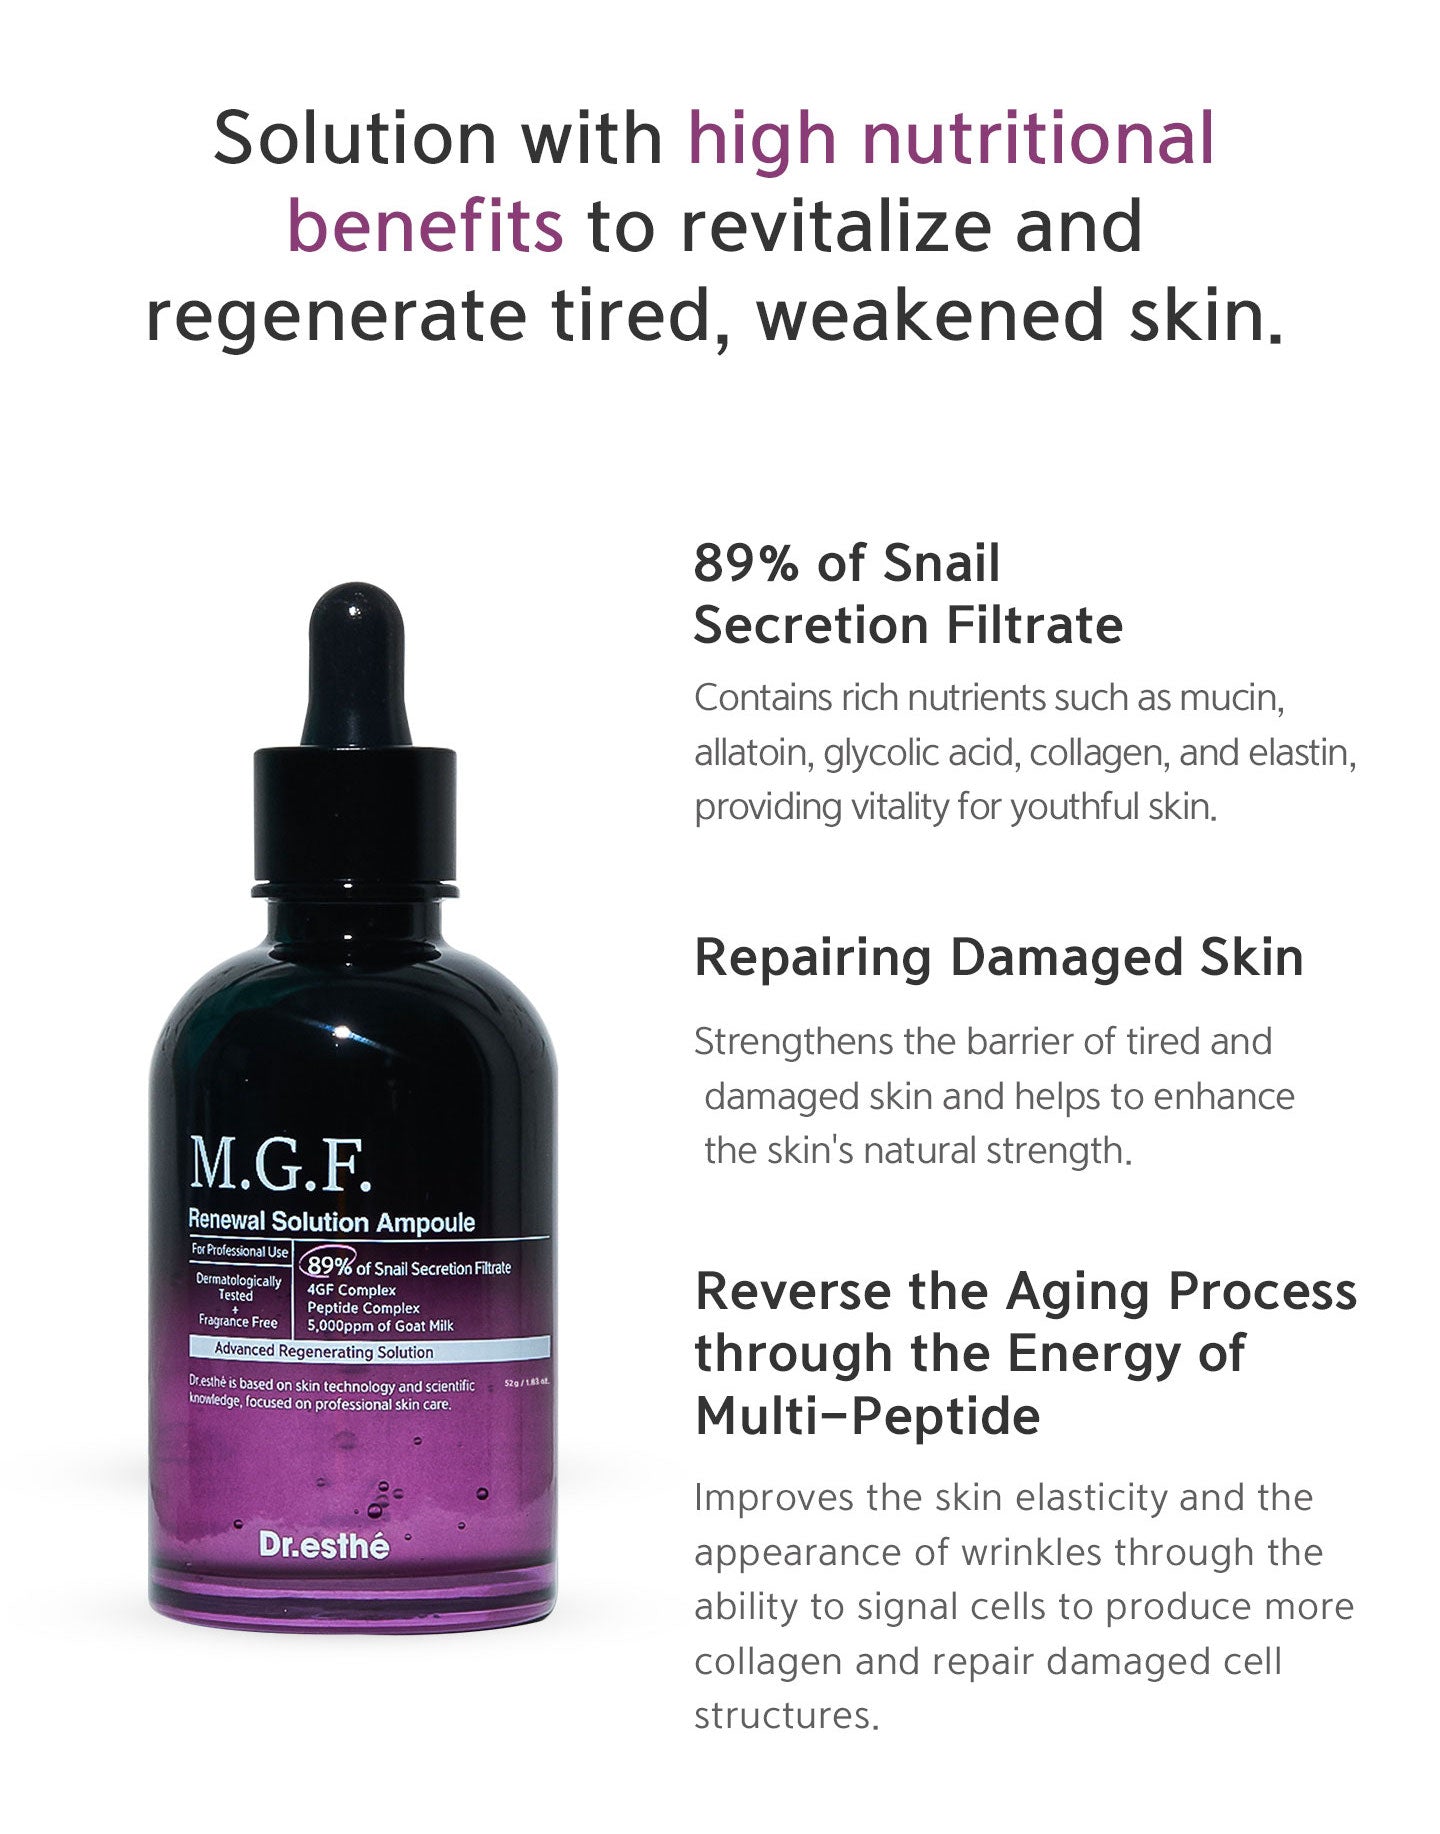 Solution with high nutritional benefits to revitalize and regenerate tired, weakened skin. 89% of snail secretion filtrate, repairing damaged skin and reverse the aging process through the energy of multi-peptide. 